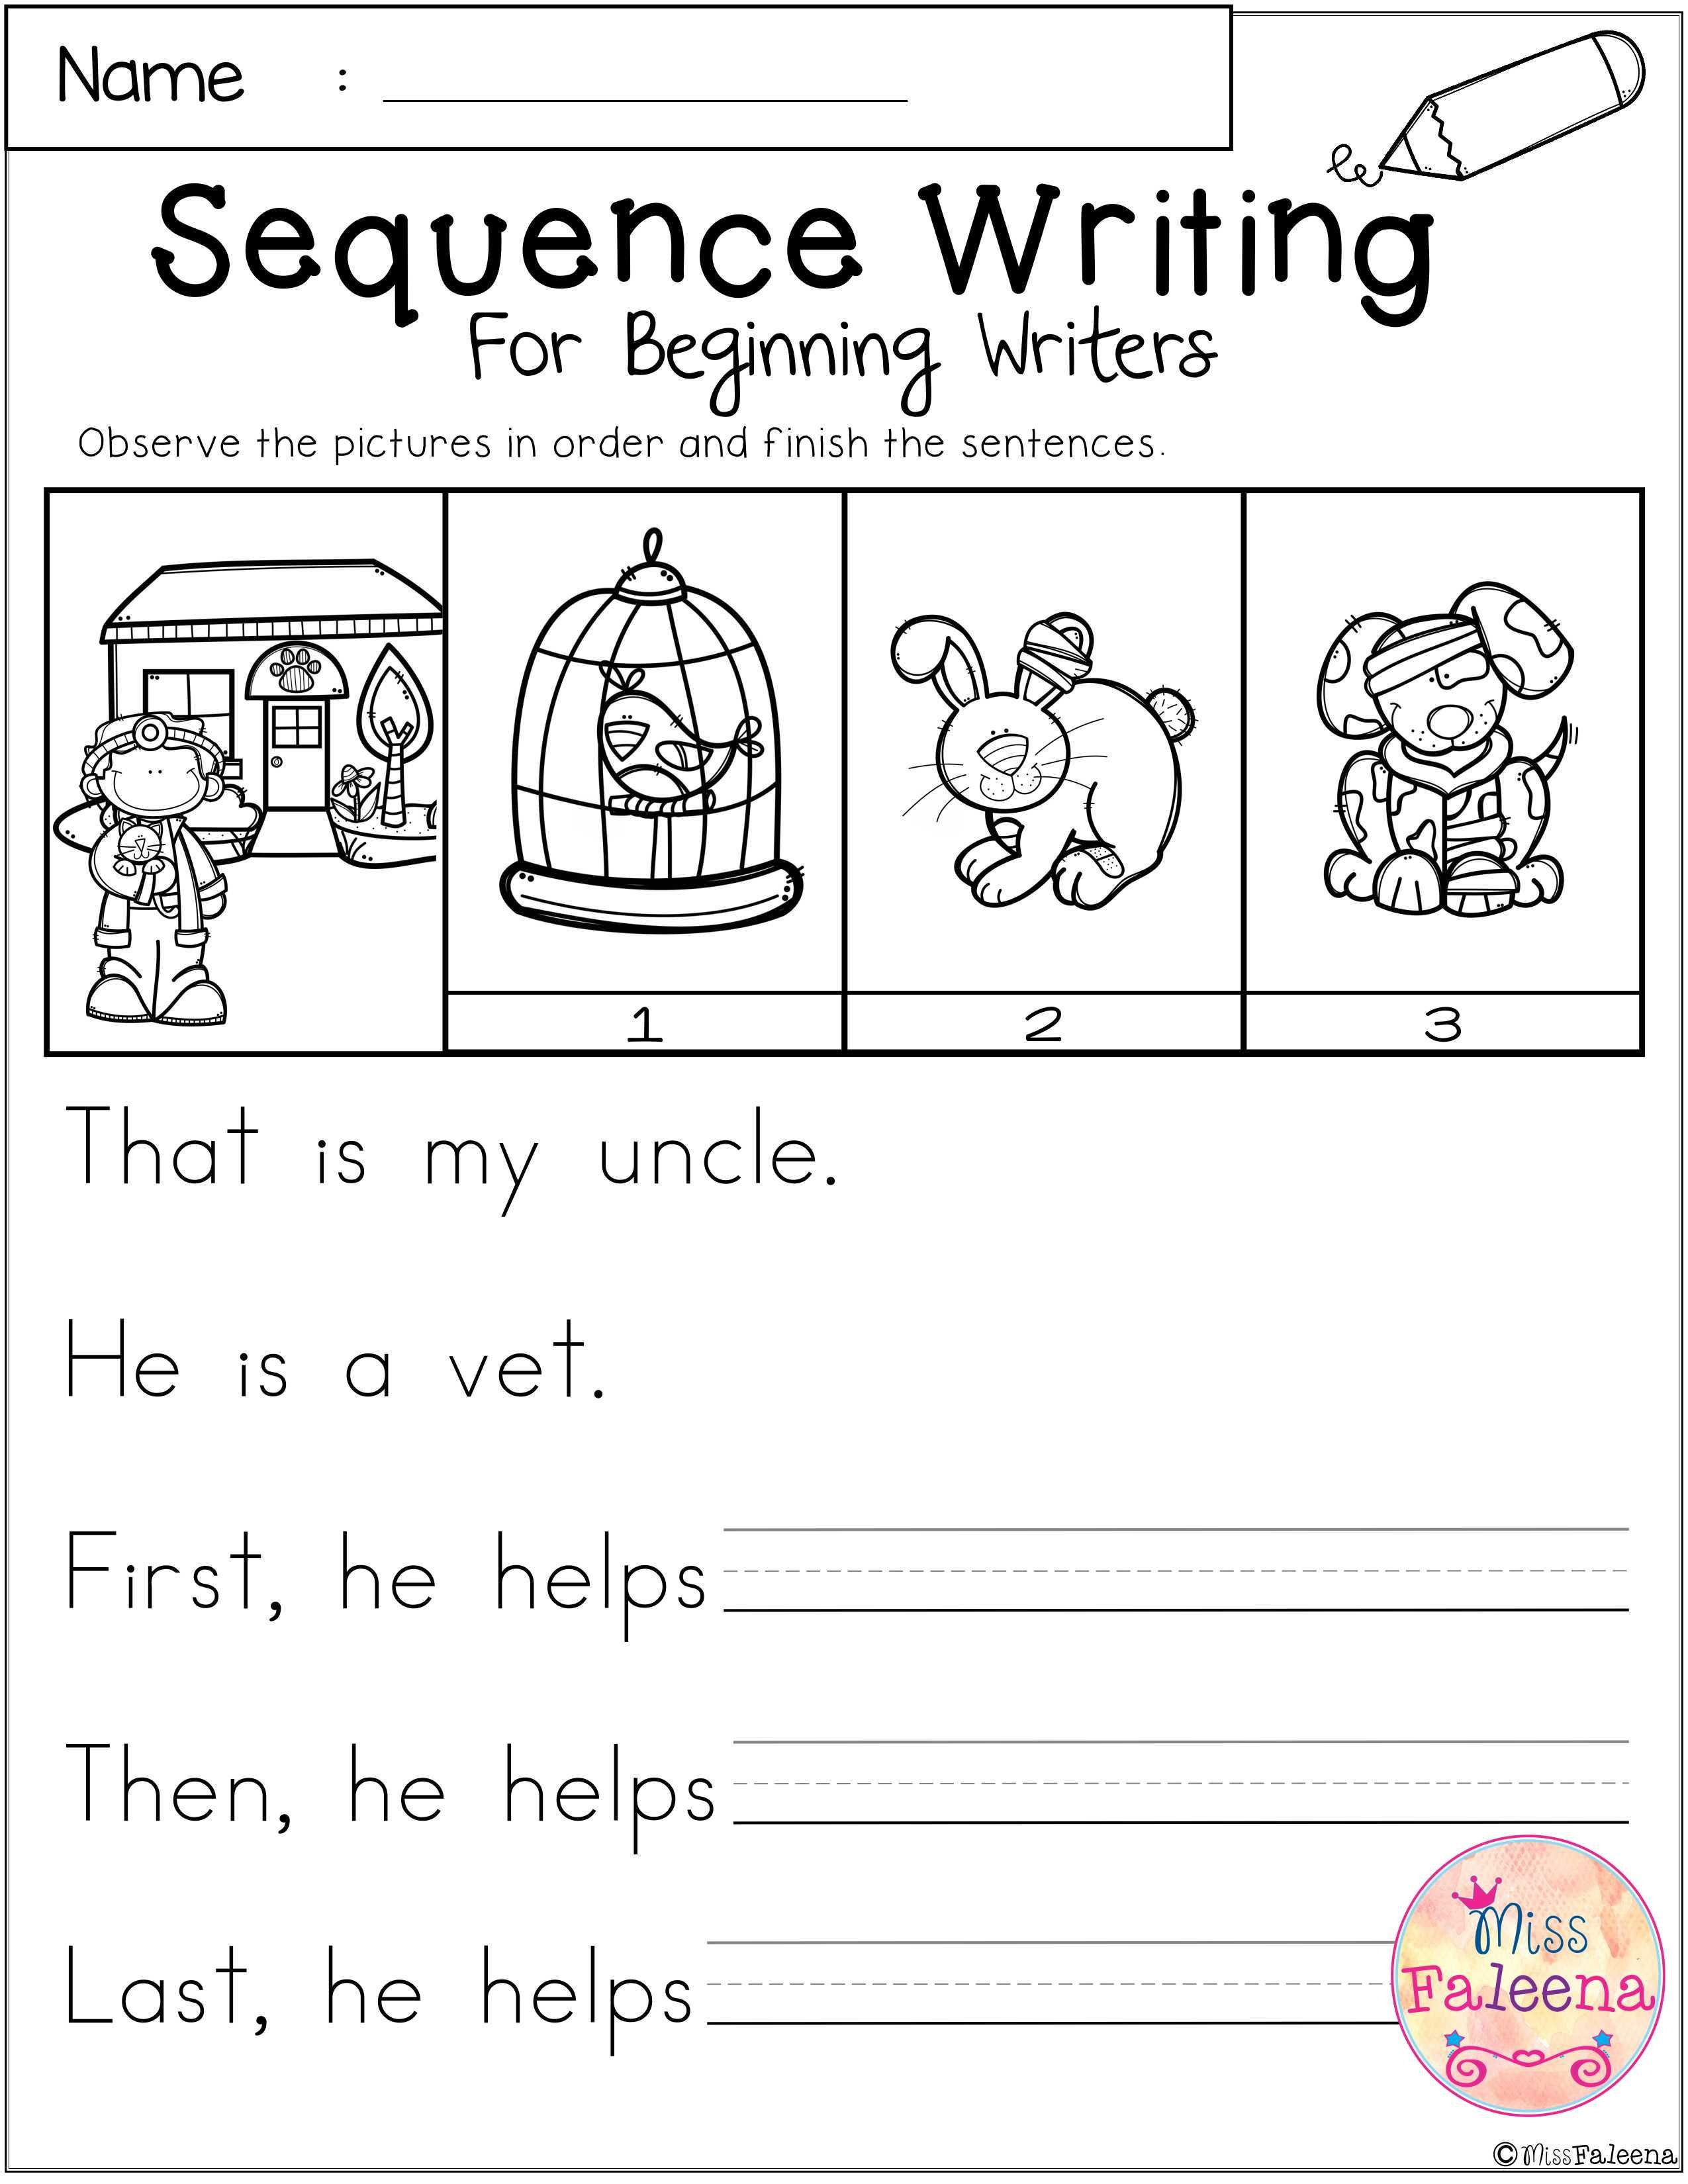 Sequence Worksheets for 1st Grade Free Sequence Writing for Beginning Writers